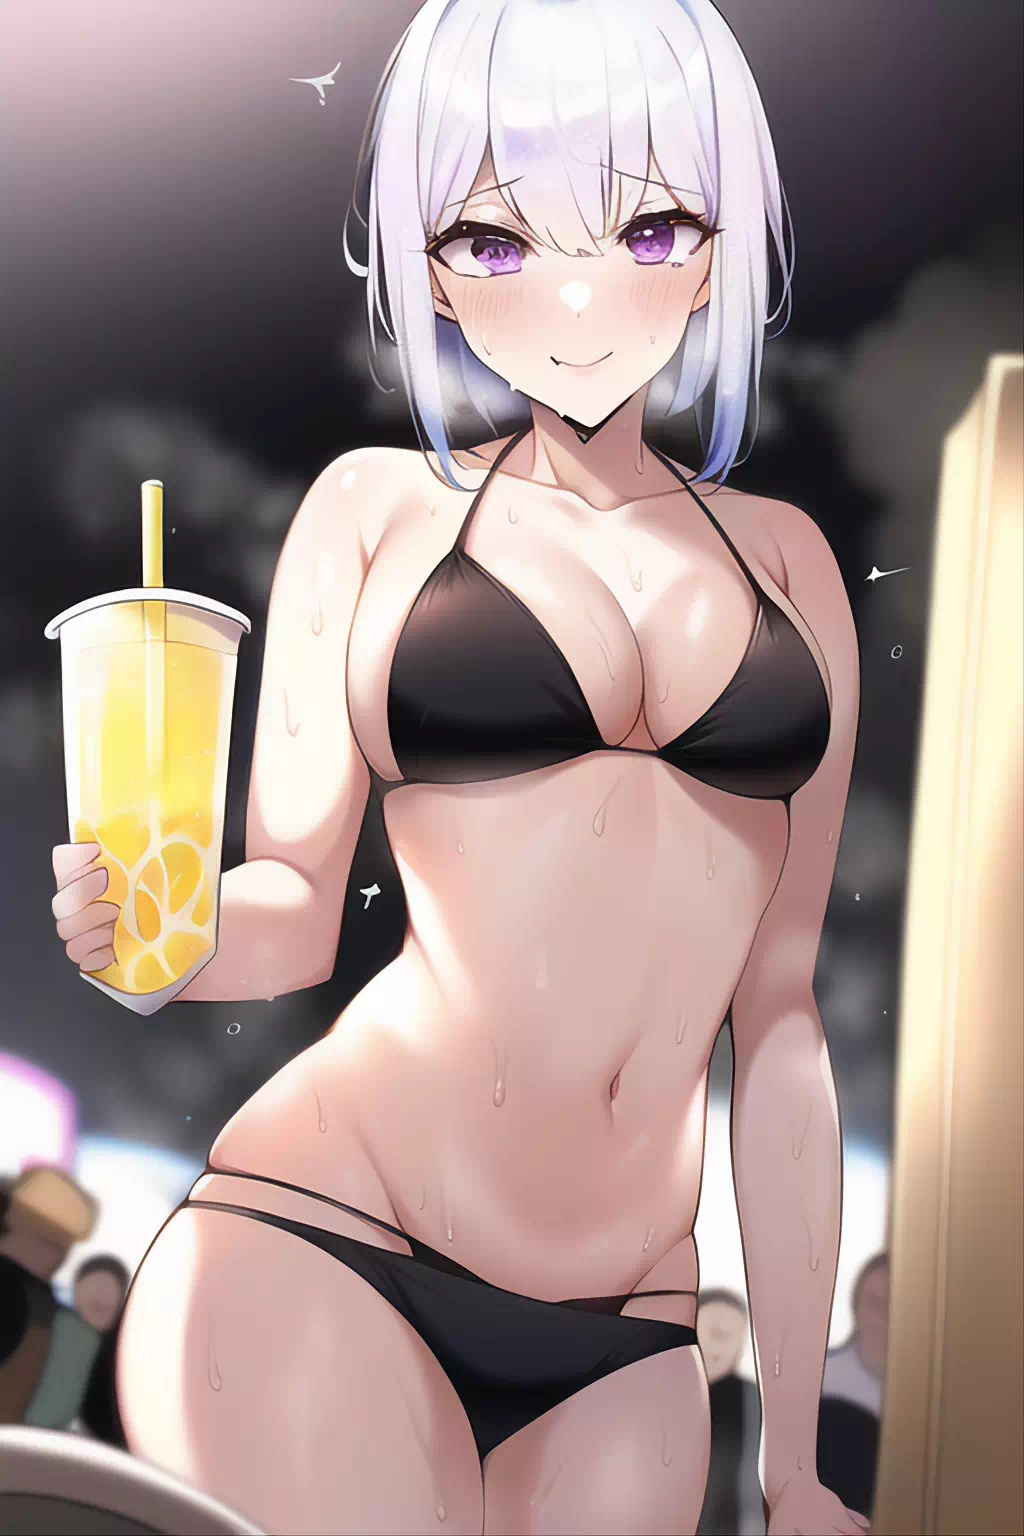 Would you like some drink ?